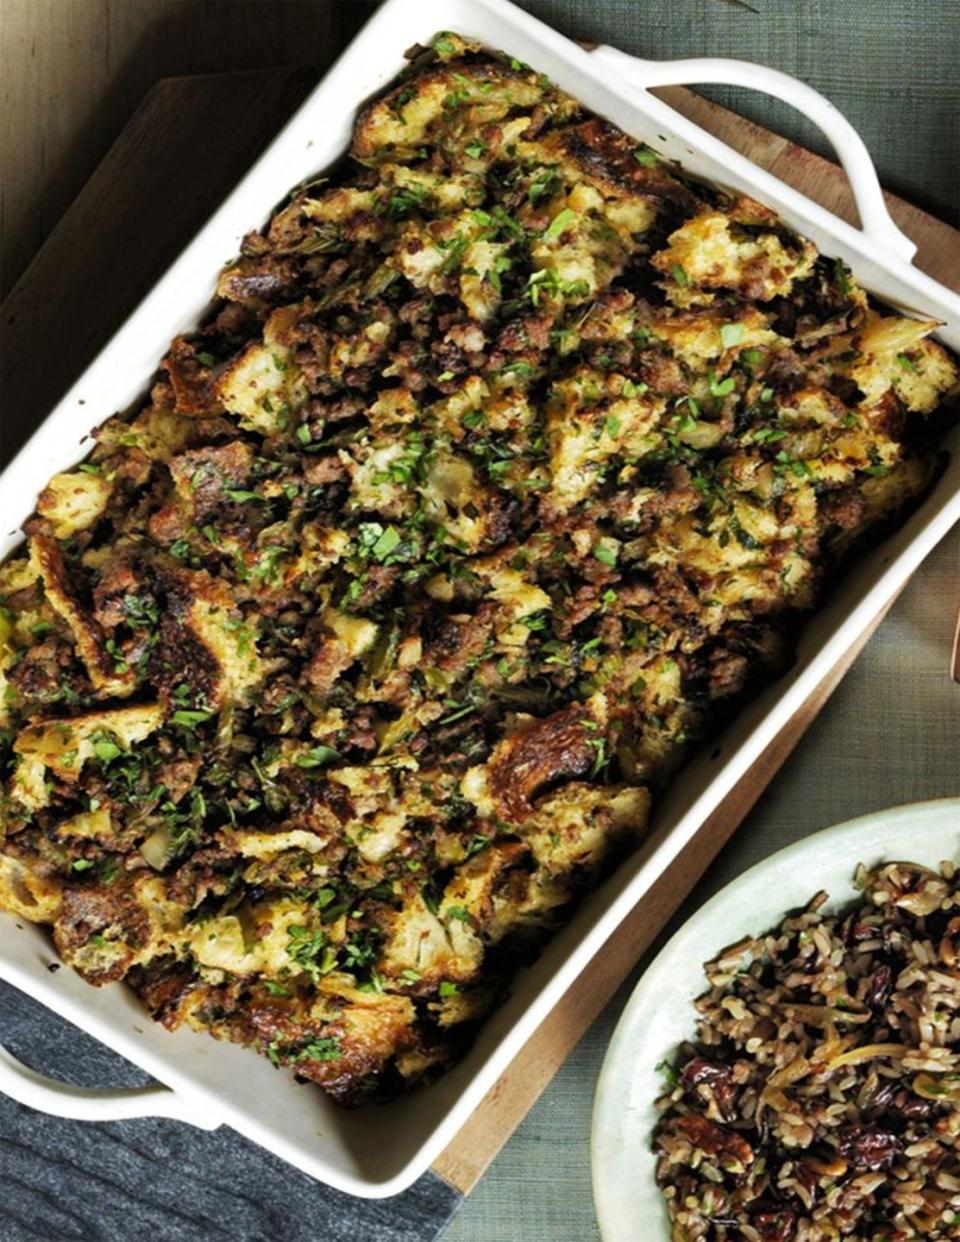 Sourdough Stuffing with Sausage and Herbs